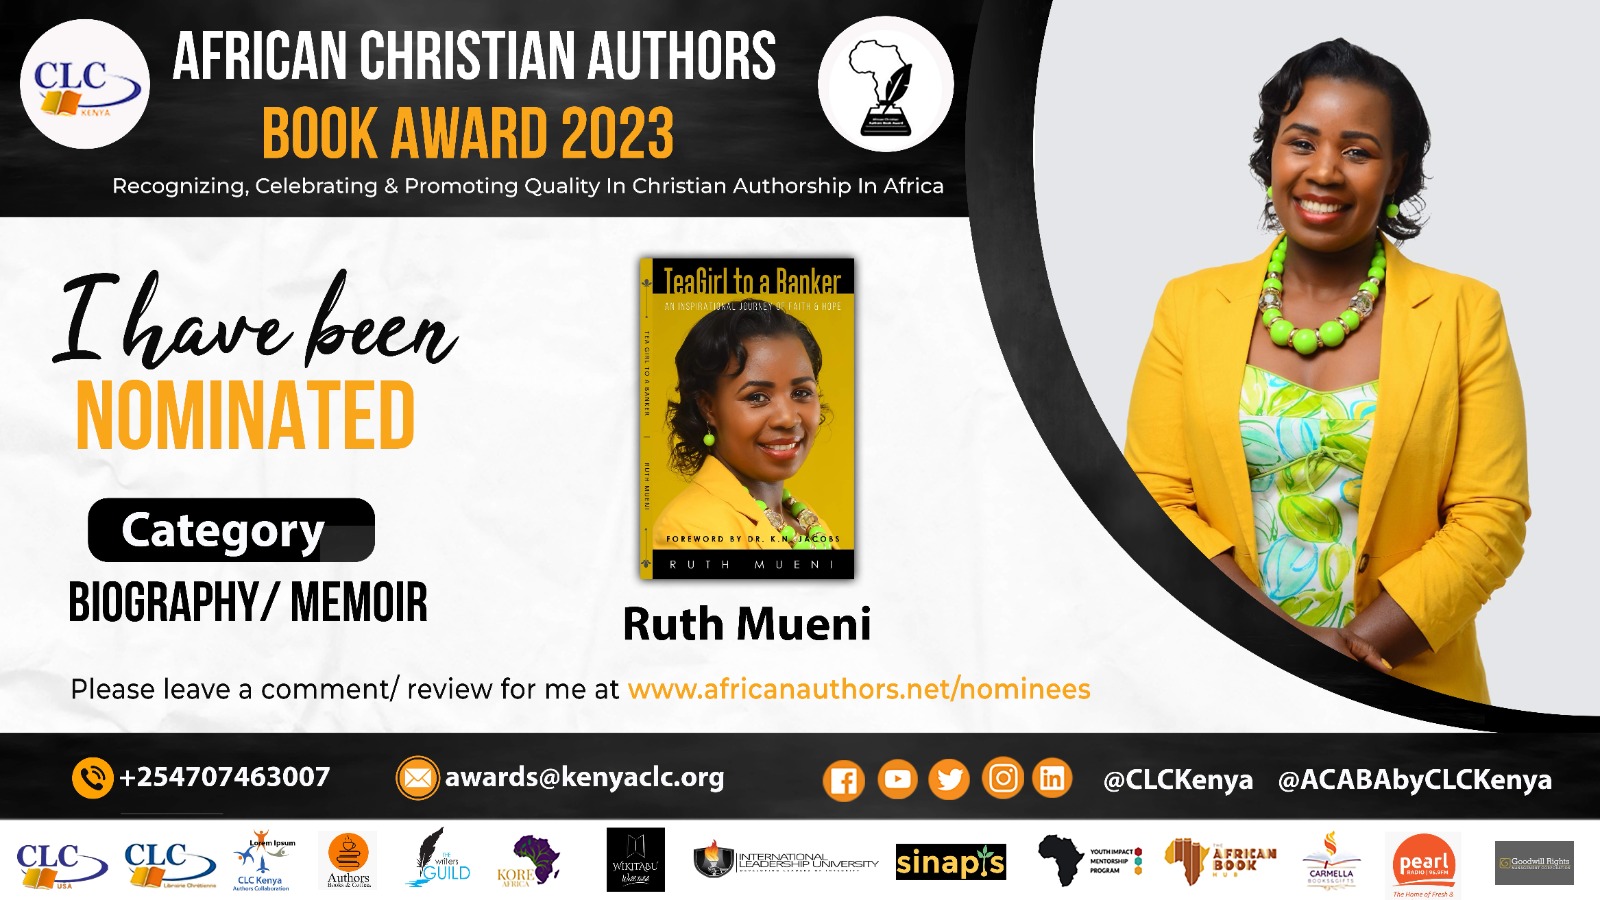 Ruth Mueni Believed That God would Change Her Story, As She Narrates In Her Book ‘My Journey of Faith And Hope’